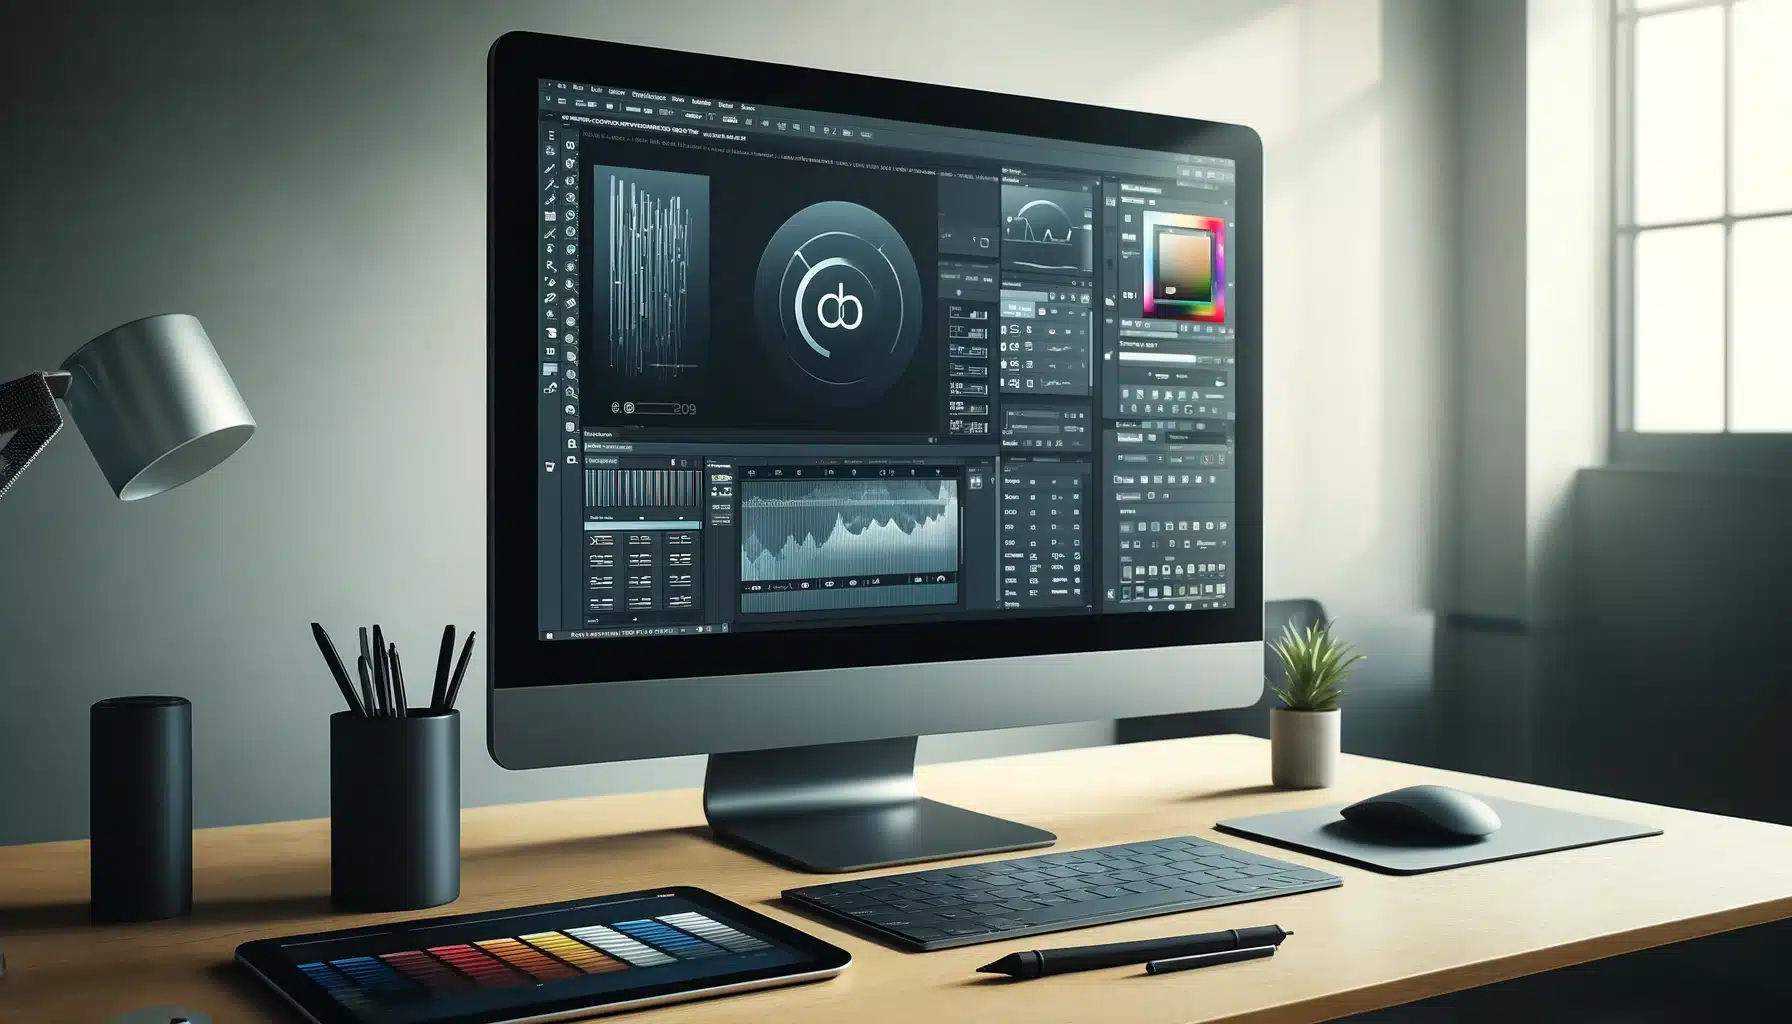 Modern graphic design workspace with a computer displaying advanced editing software along with Adobe Photoshop New Features, alongside professional creative tools.